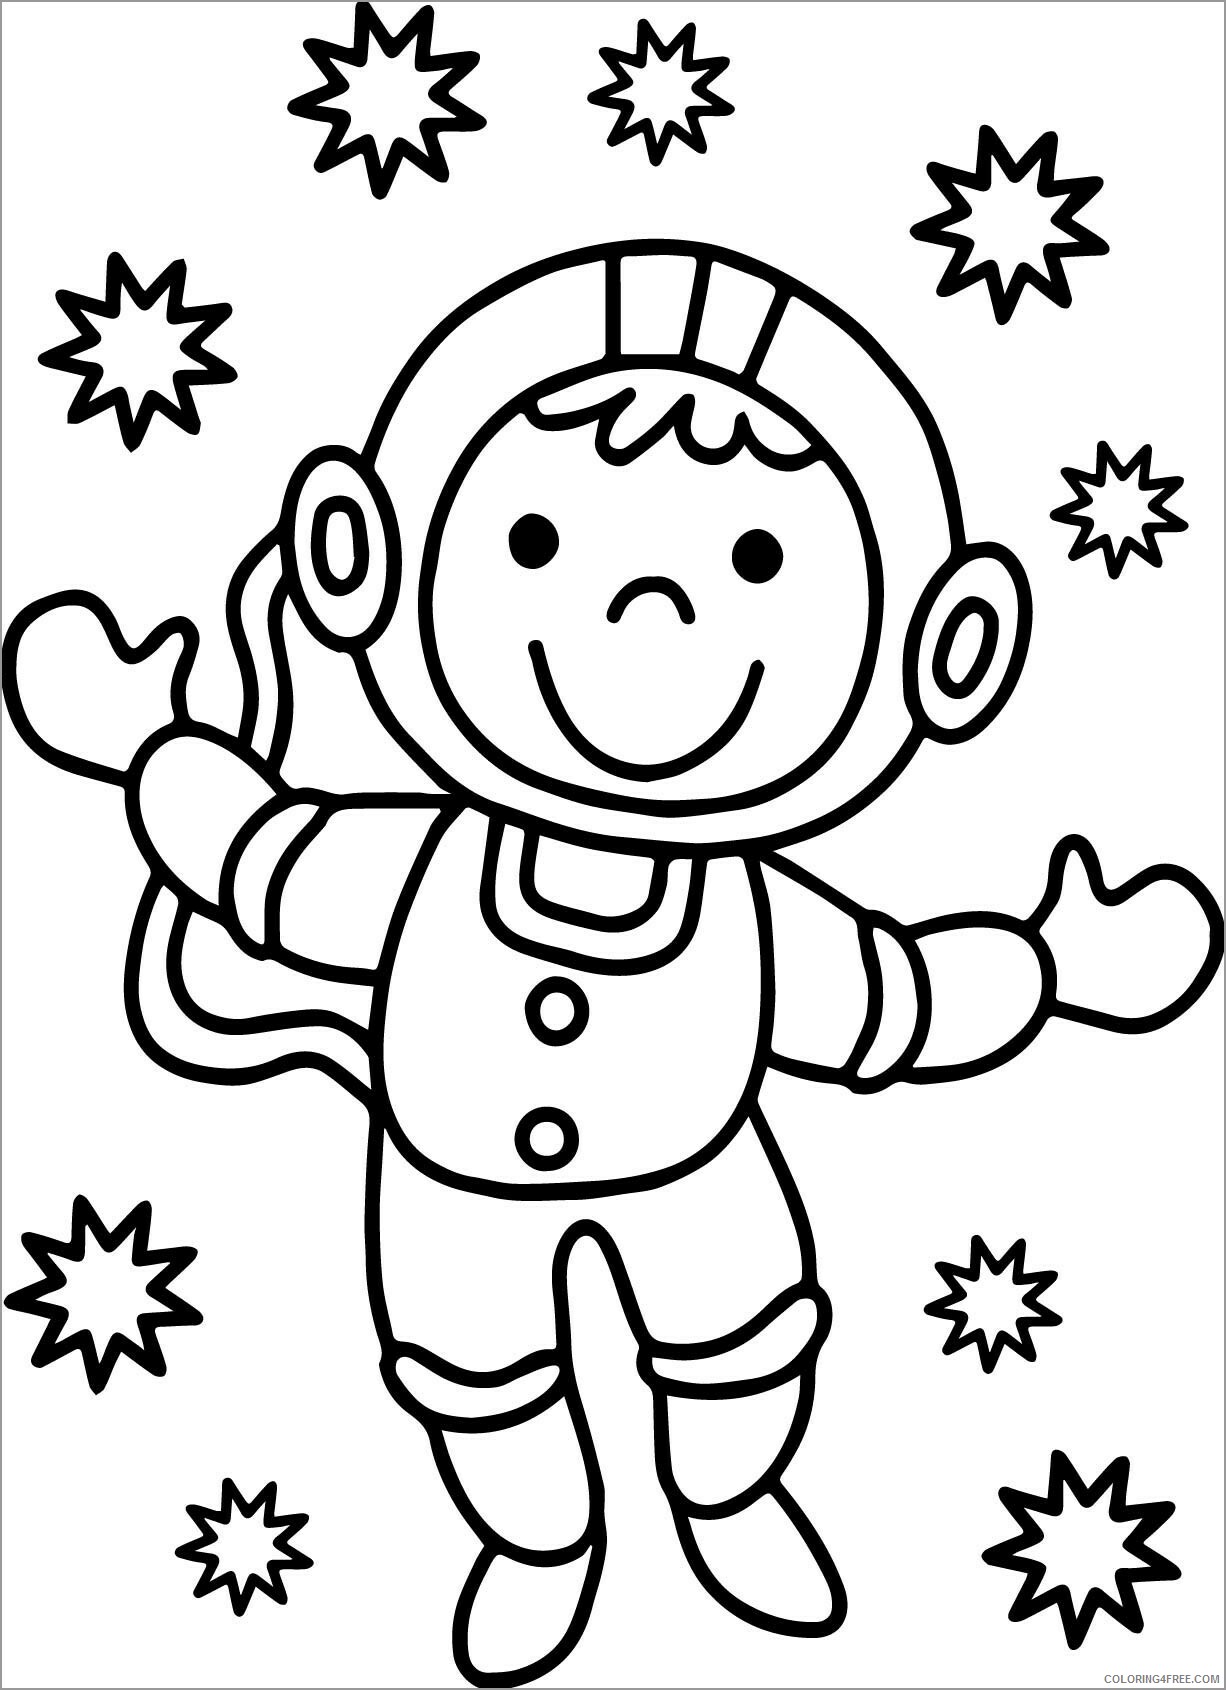 Astronaut Coloring Pages cool astronaut Printable 2021 0382 Coloring4free